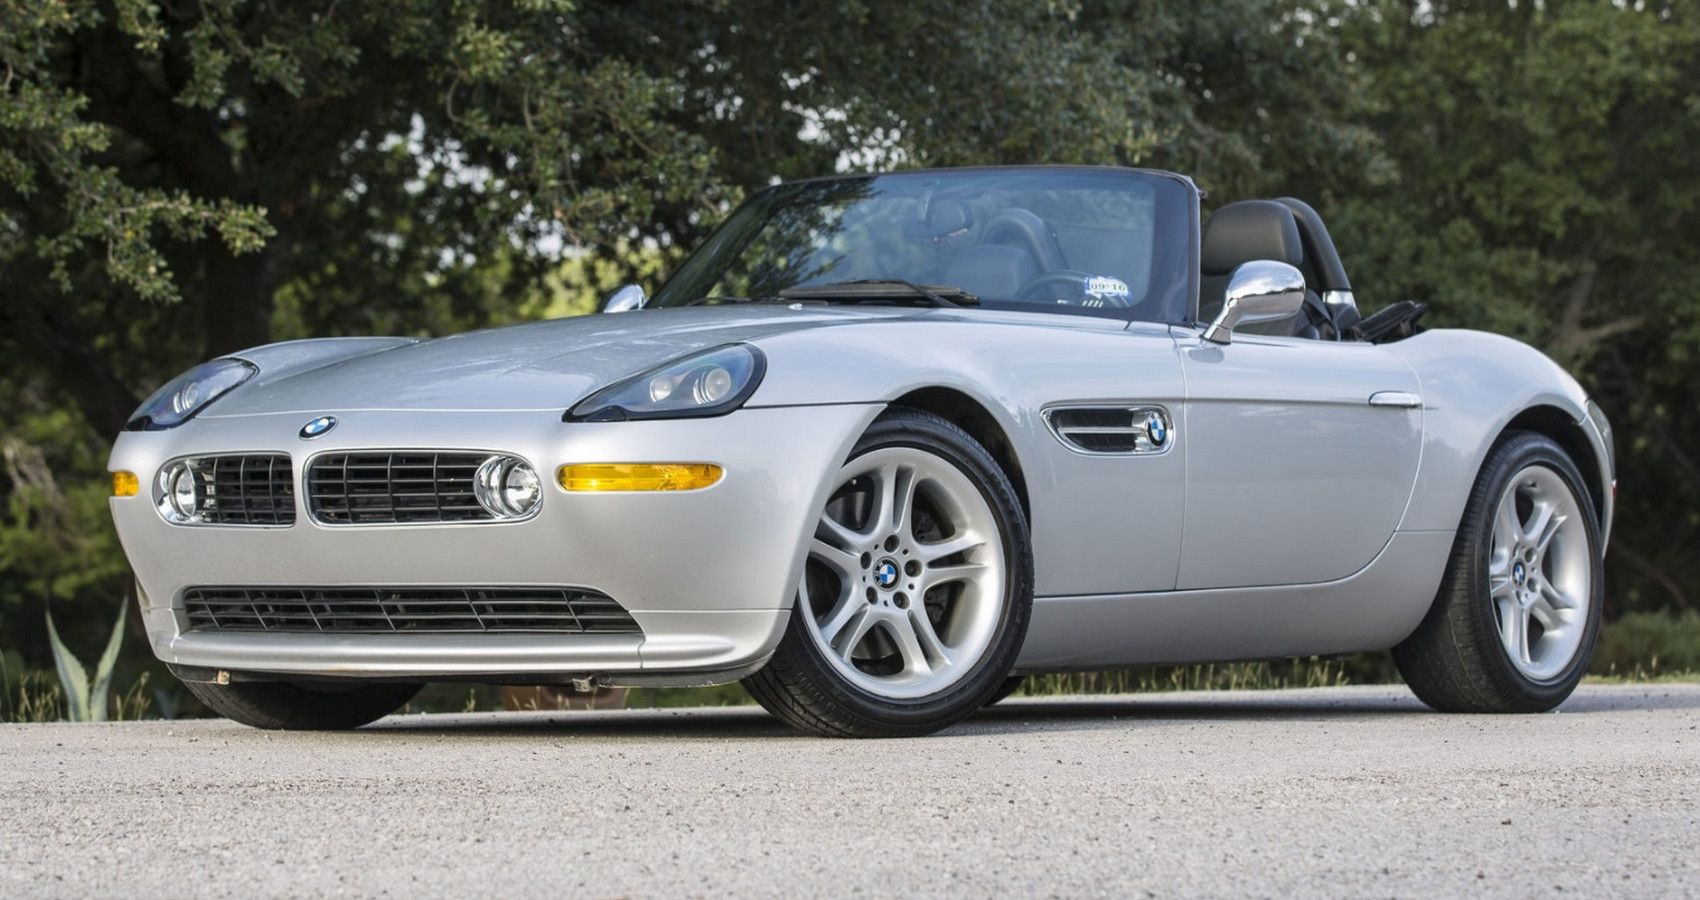 10 Reasons Why The Bmw Z8 Is Awesome